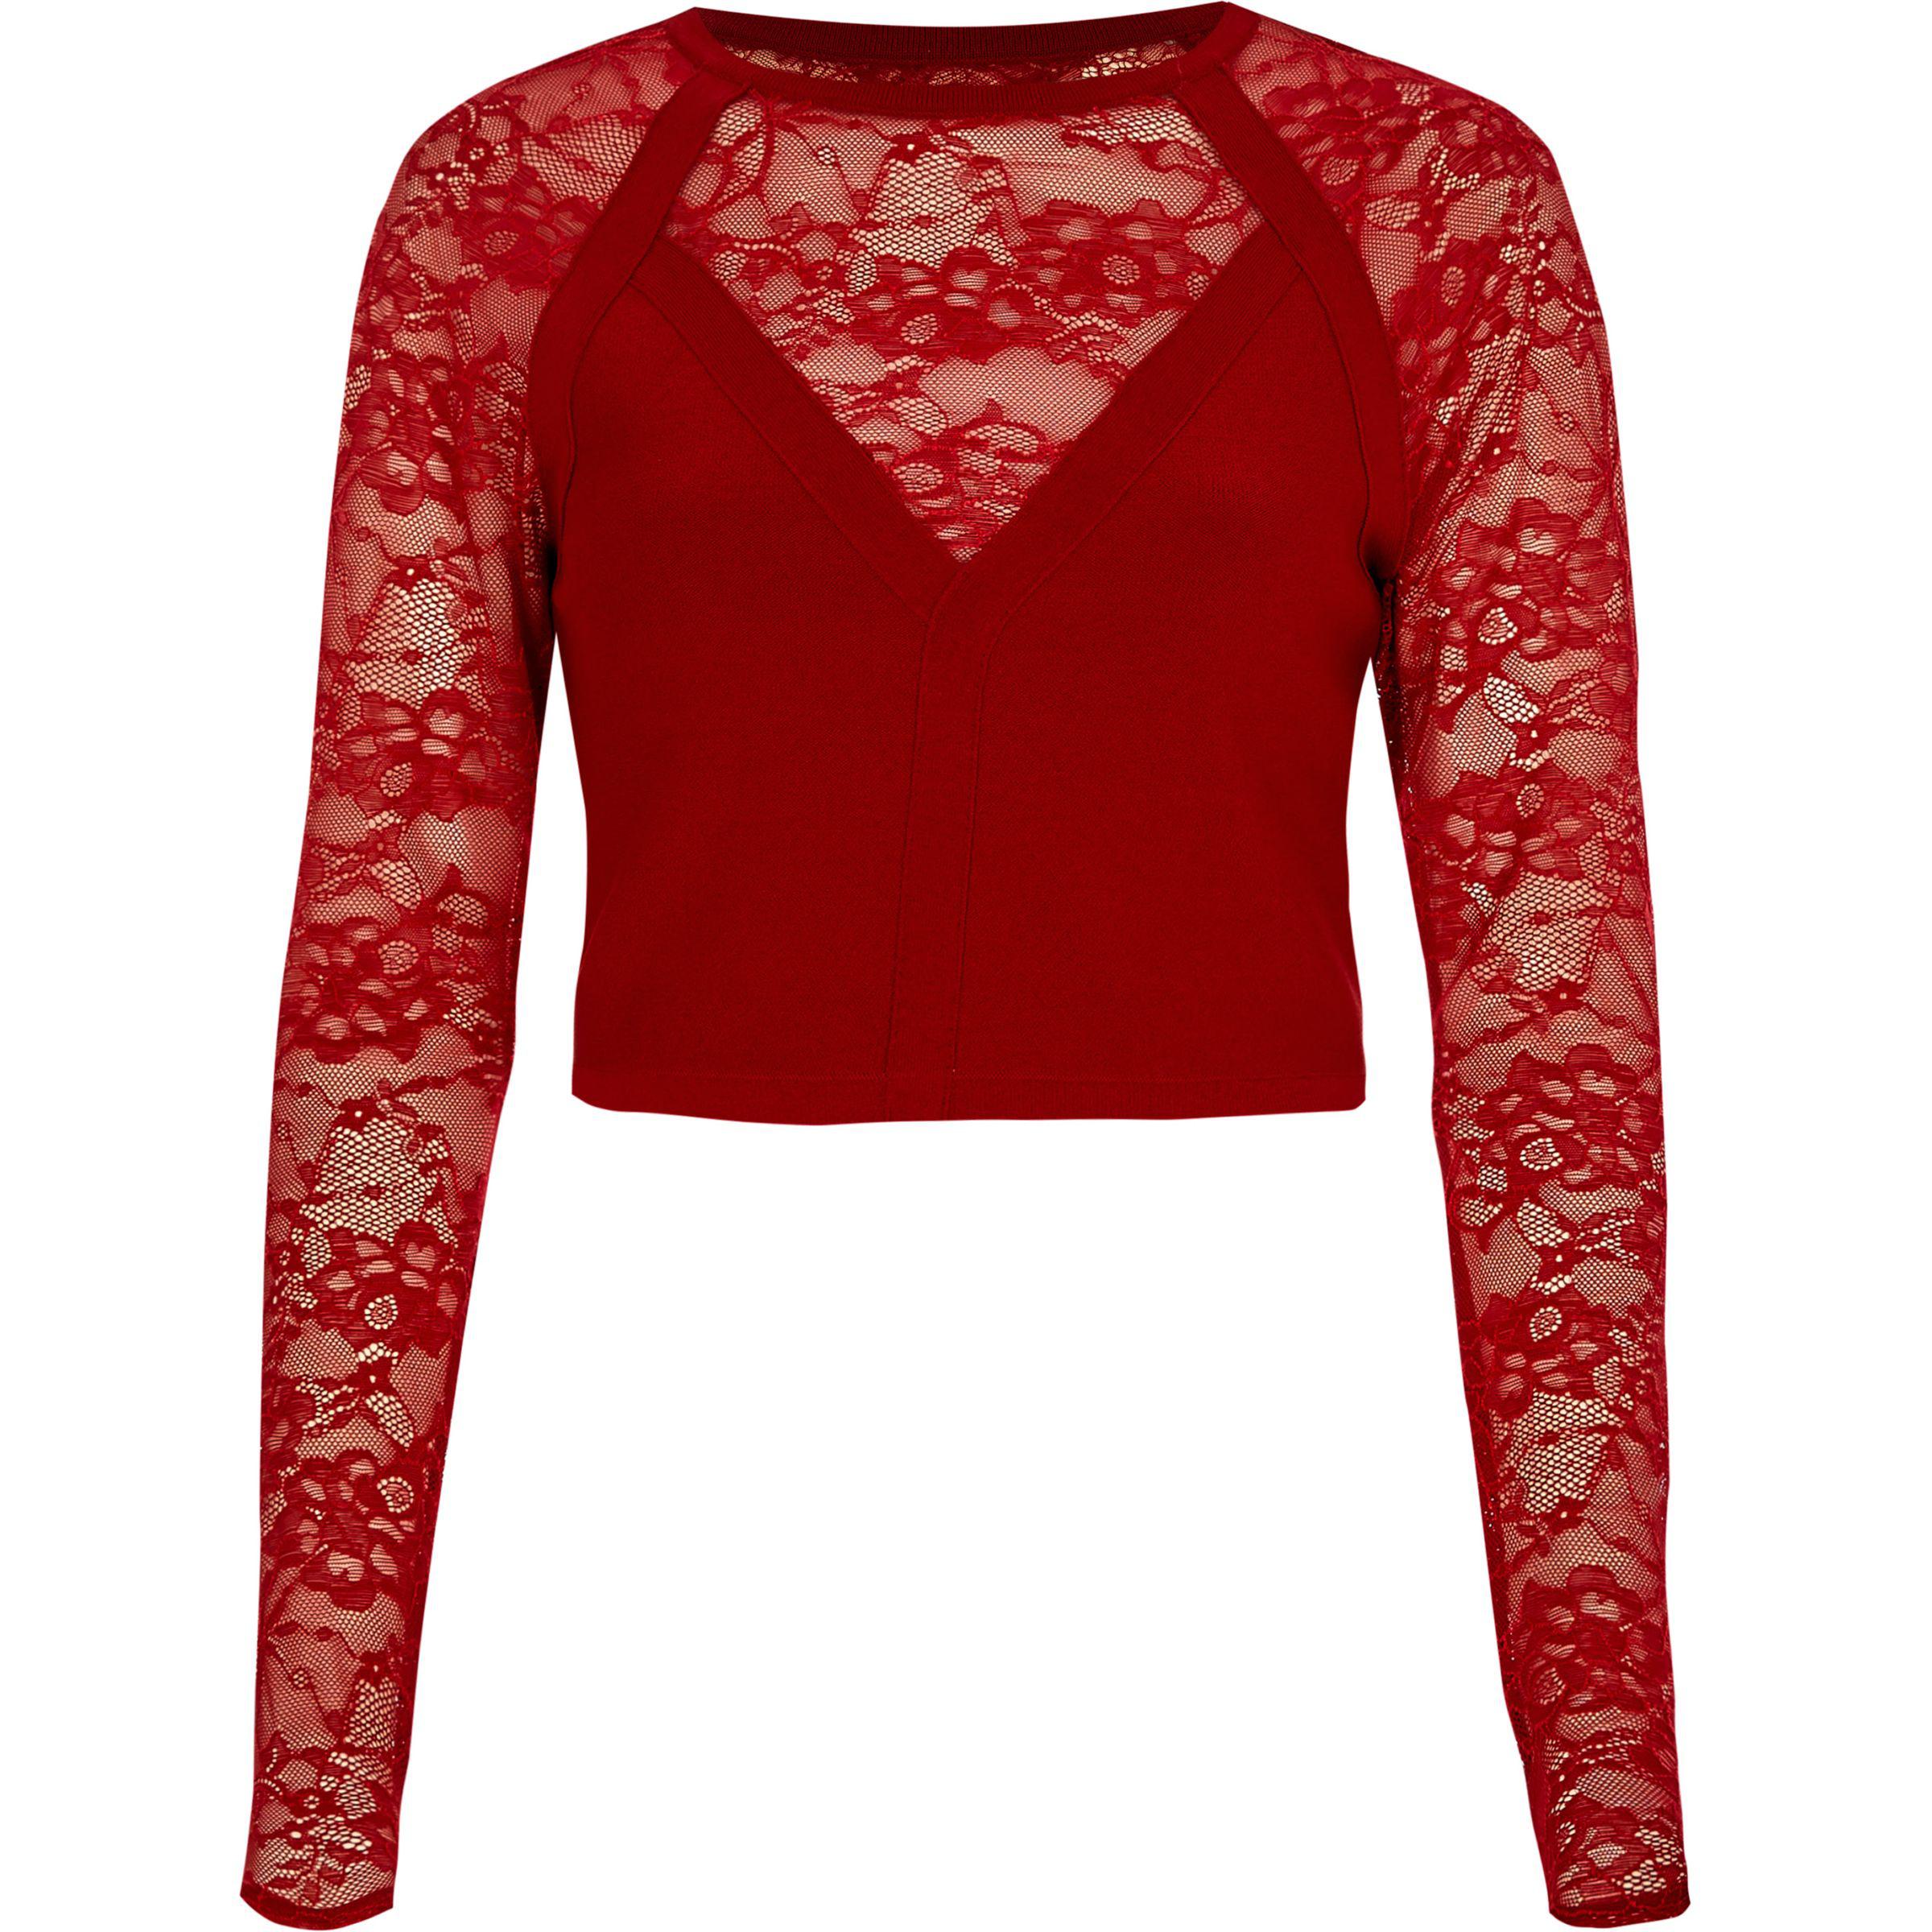 River Island Lace Long Sleeve Crop Top in Red | Lyst